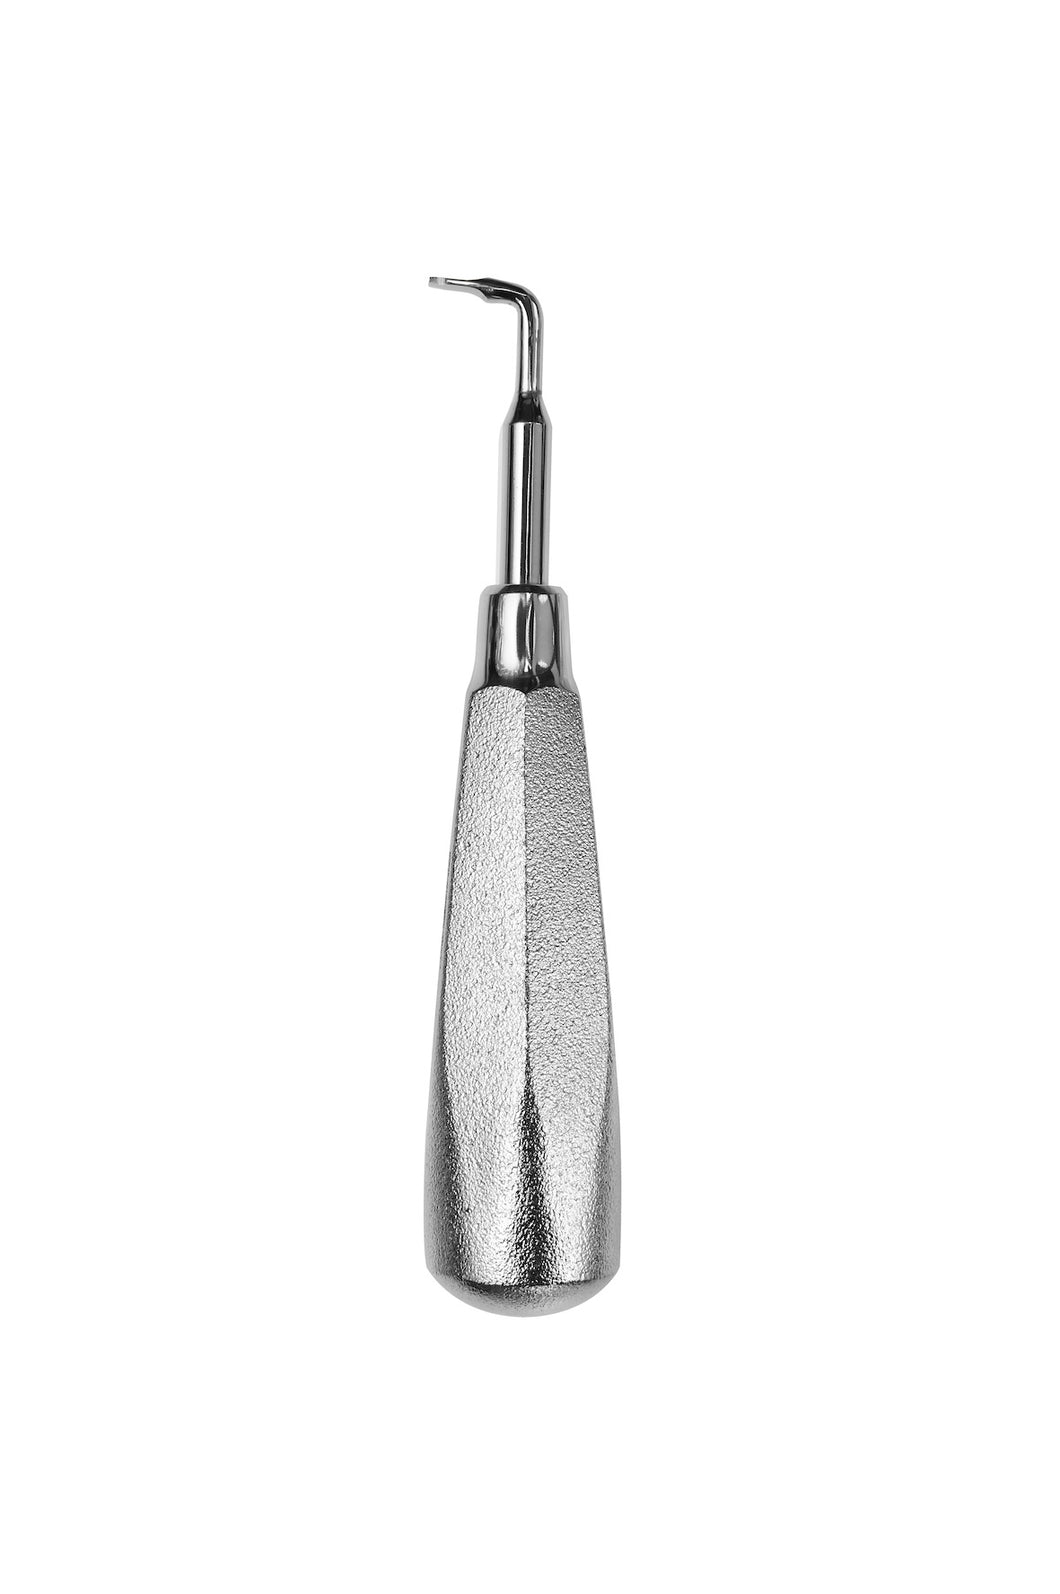 Christensen Crown Remover 90 degree angled, For permanent removal of crowns by breaking the seal between tooth and crown after sectioning with a bur.Posterior 3.0mm